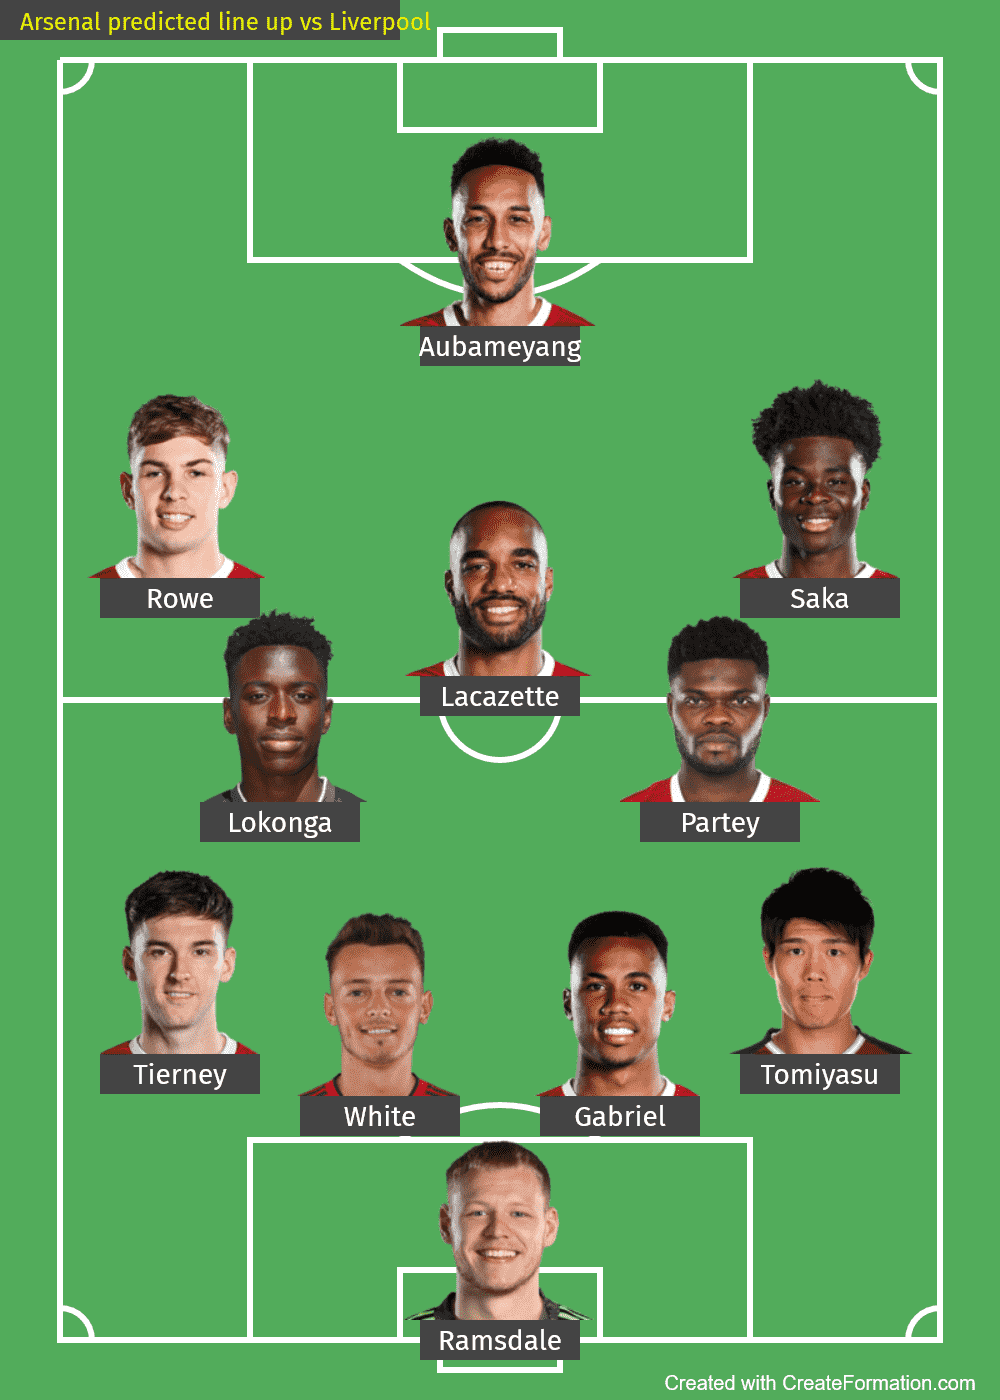 Arsenal predicted line up vs Liverpool